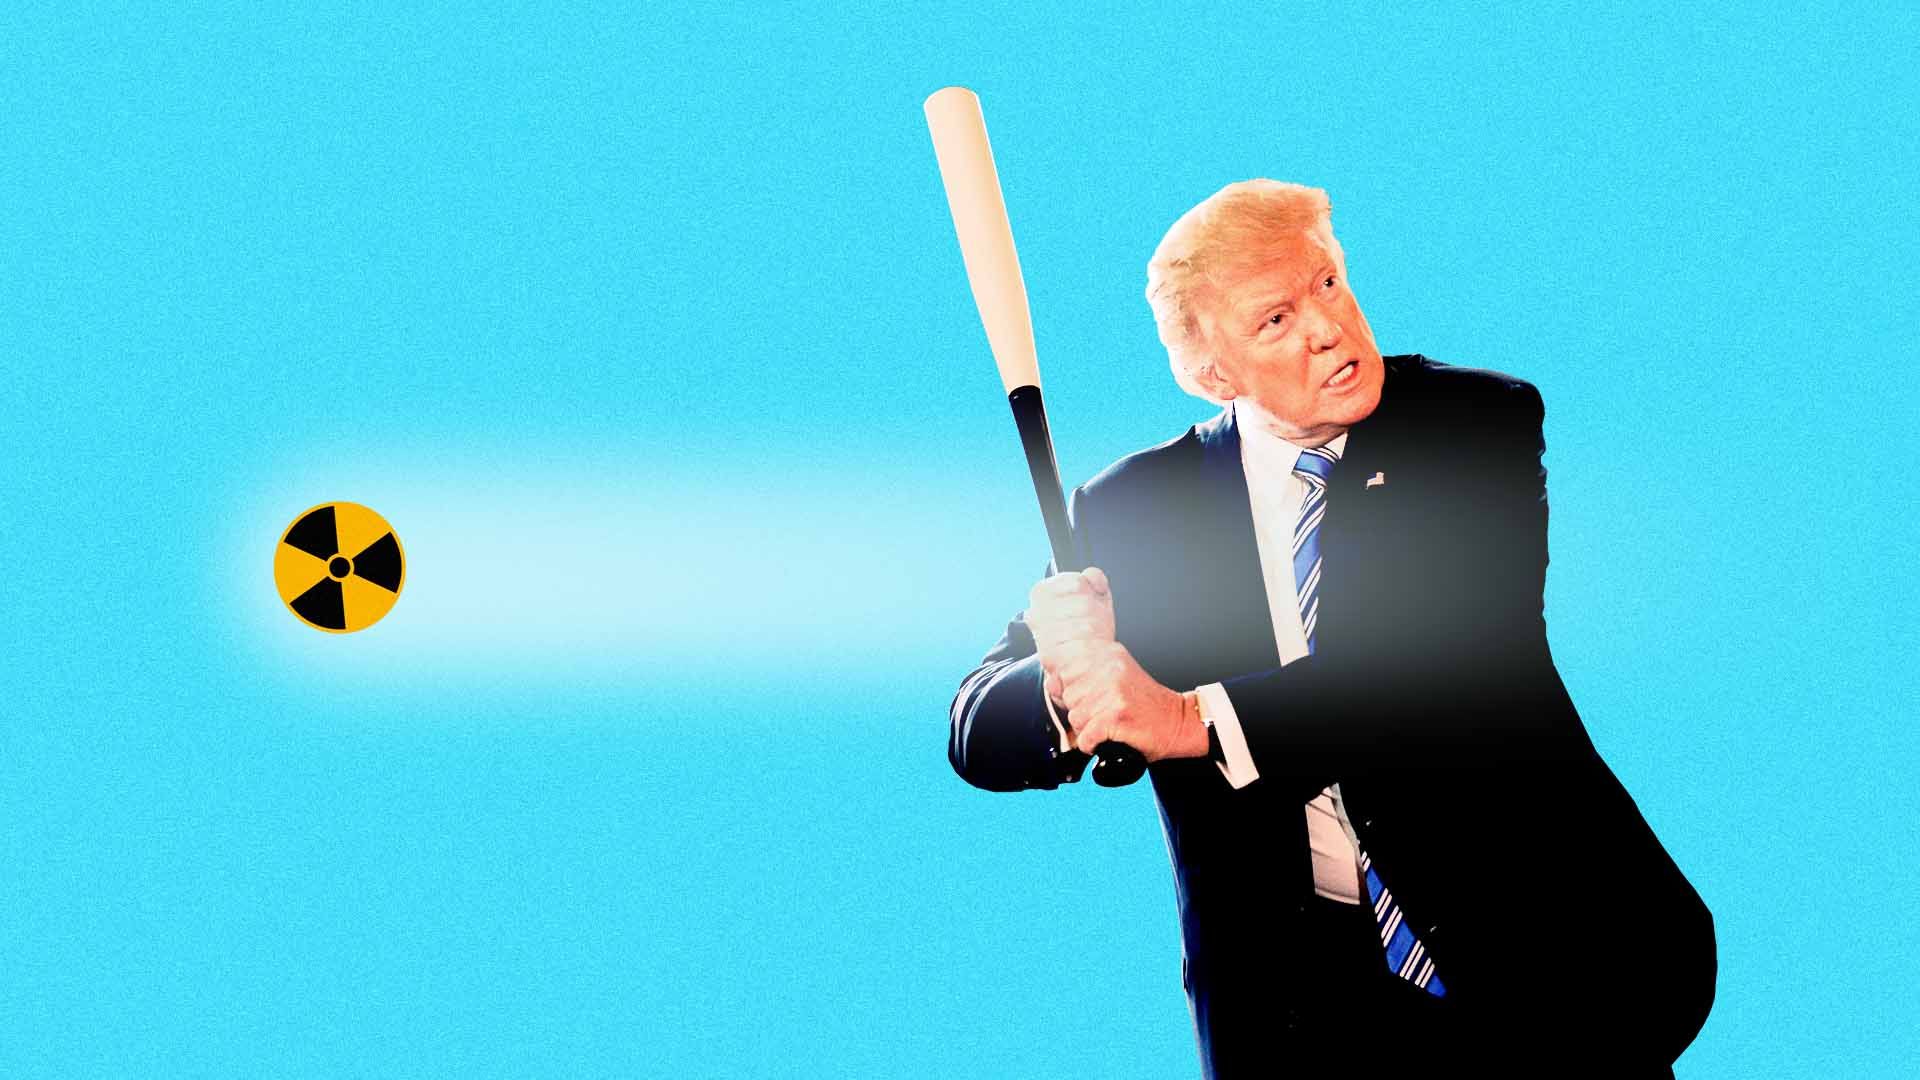 Illustration of President Trump holding a baseball bat with a nuclear reactor symbol sailing by